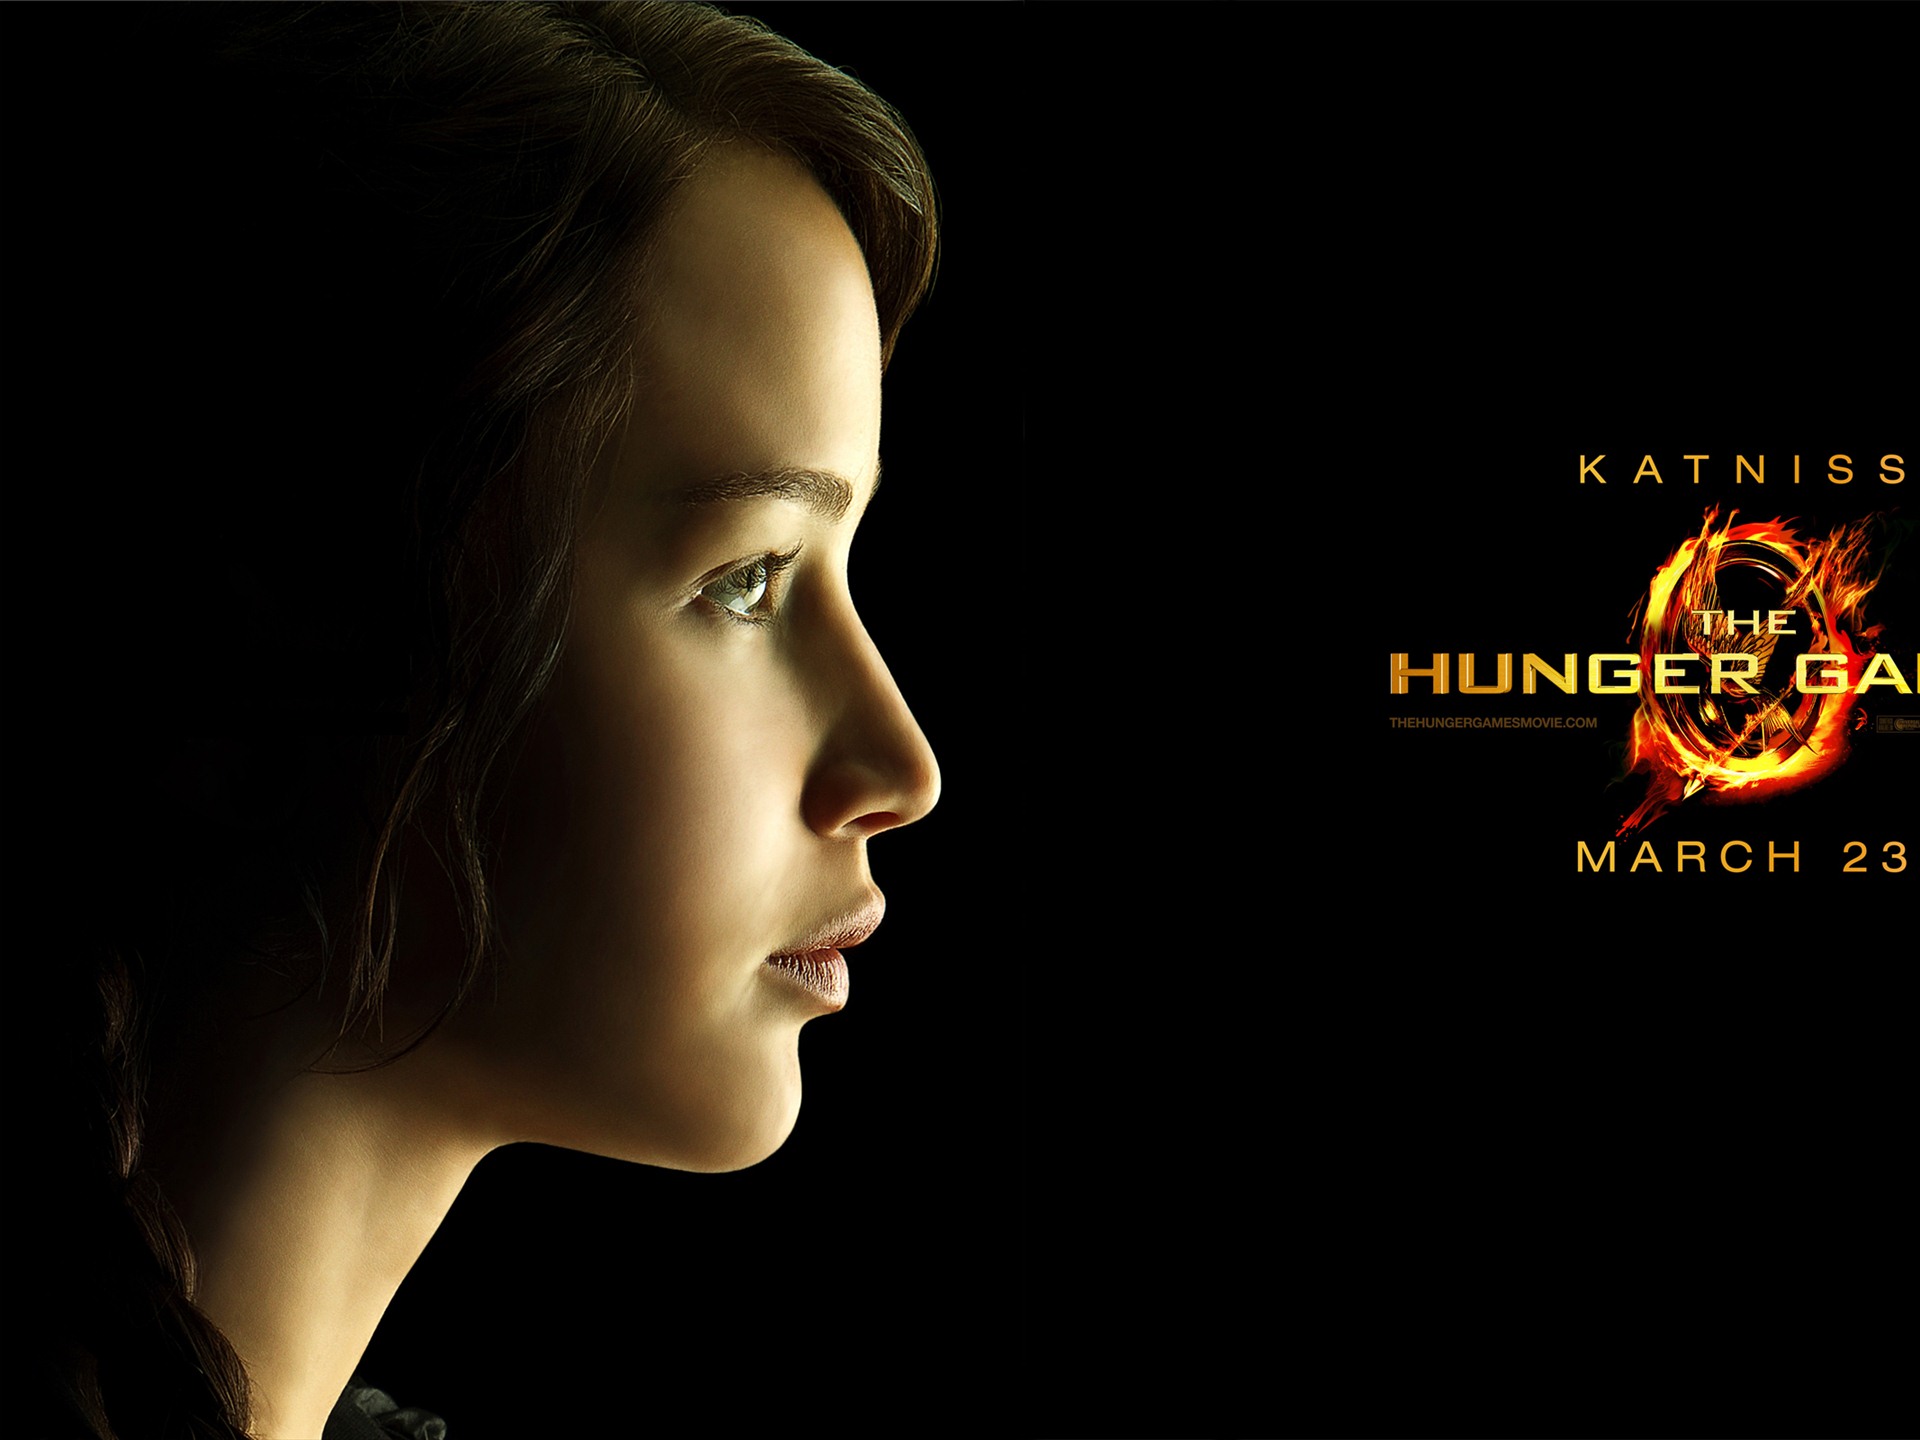 The Hunger Games HD wallpapers #14 - 1920x1440